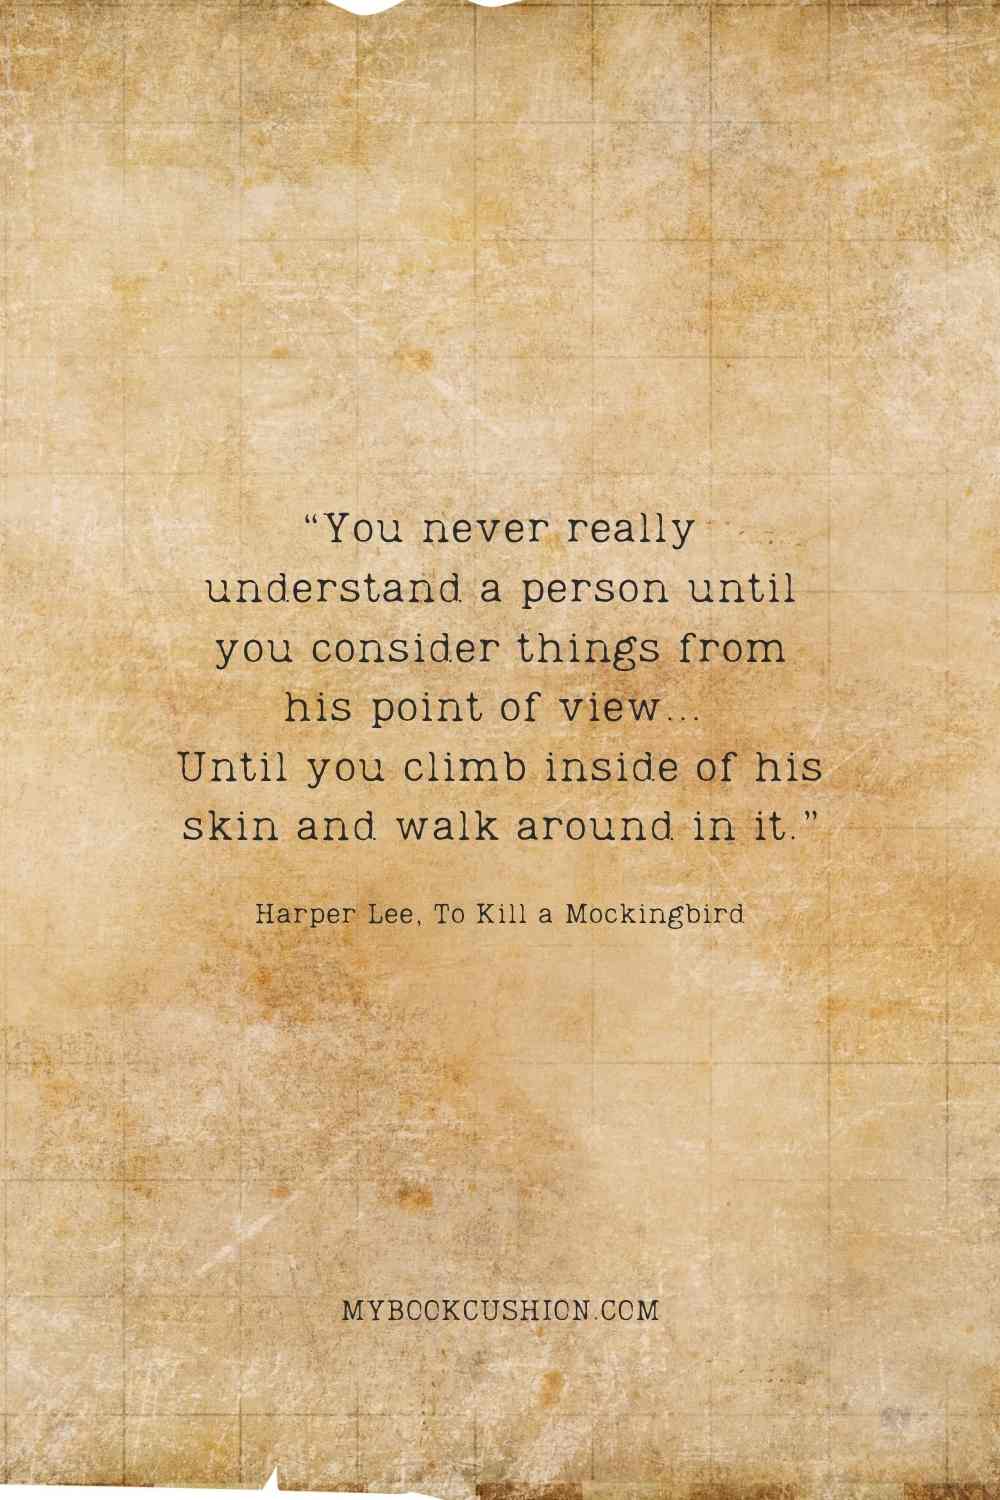 “You never really understand a person until you consider things from his point of view…  Until you climb inside of his skin and walk around in it.” -Harper Lee, To Kill a Mockingbird